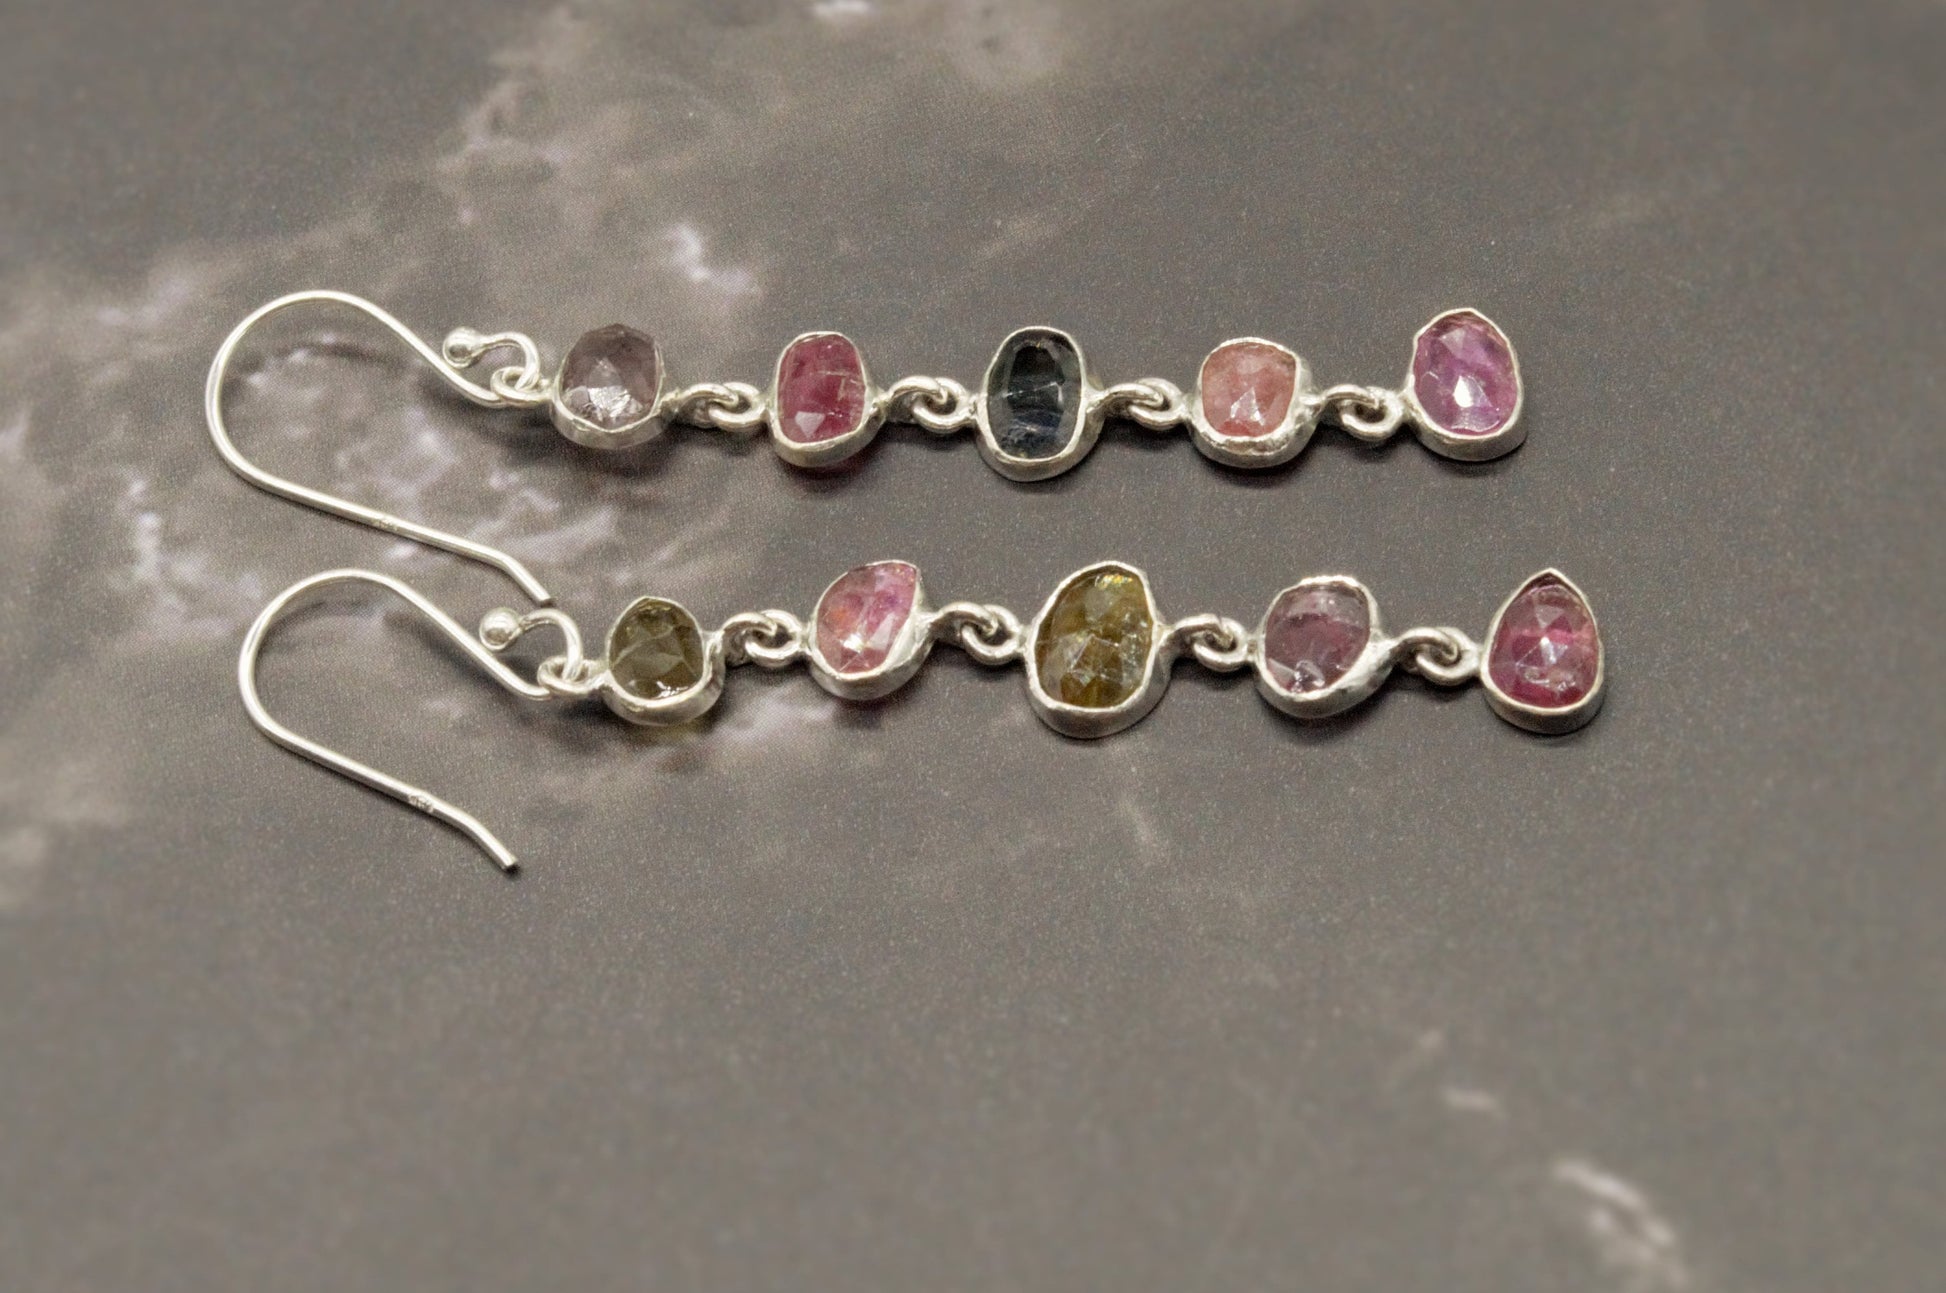 Mixed Tourmaline Earrings, Green Pink Tourmaline Sterling Silver, 925 Silver, Dangle Earrings, Gift for her